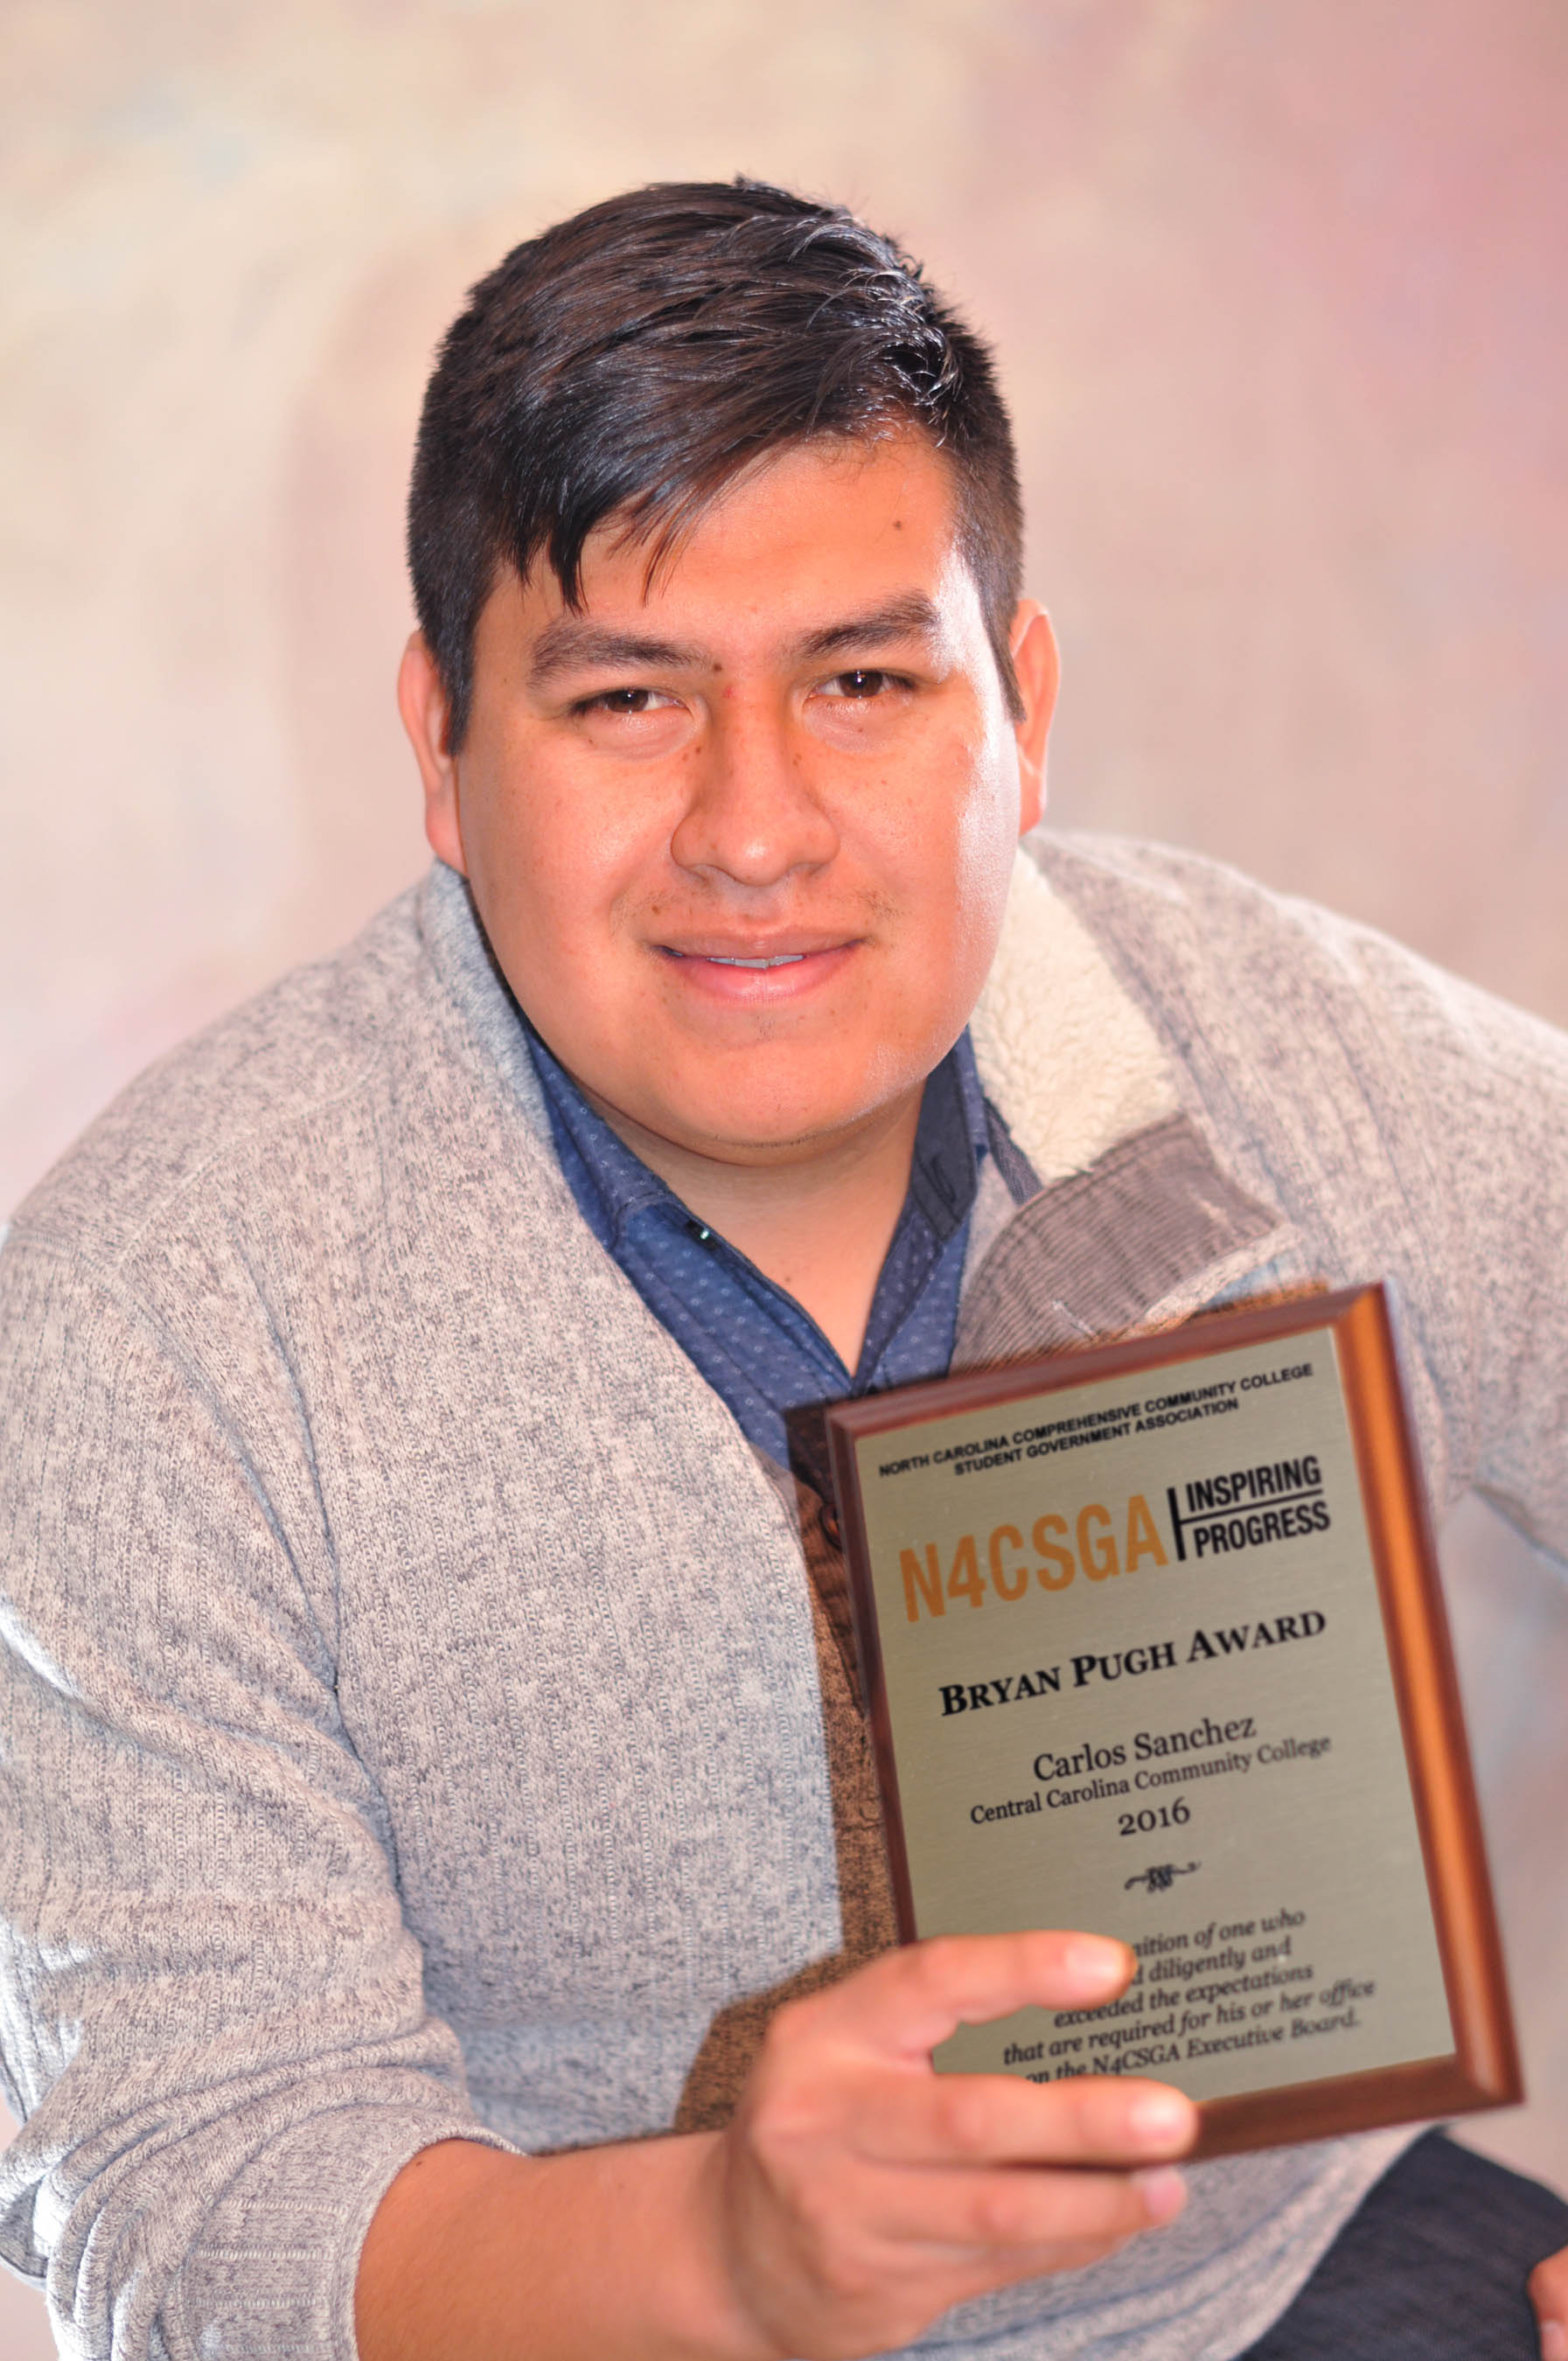 Click to enlarge,  Central Carolina Community College Student Government Association President Carlos Sanchez-Mendez of Siler City recently received the Bryan Pugh Award during the spring conference of the North Carolina Comprehensive Community College Student Government Association (N4CSGA).  